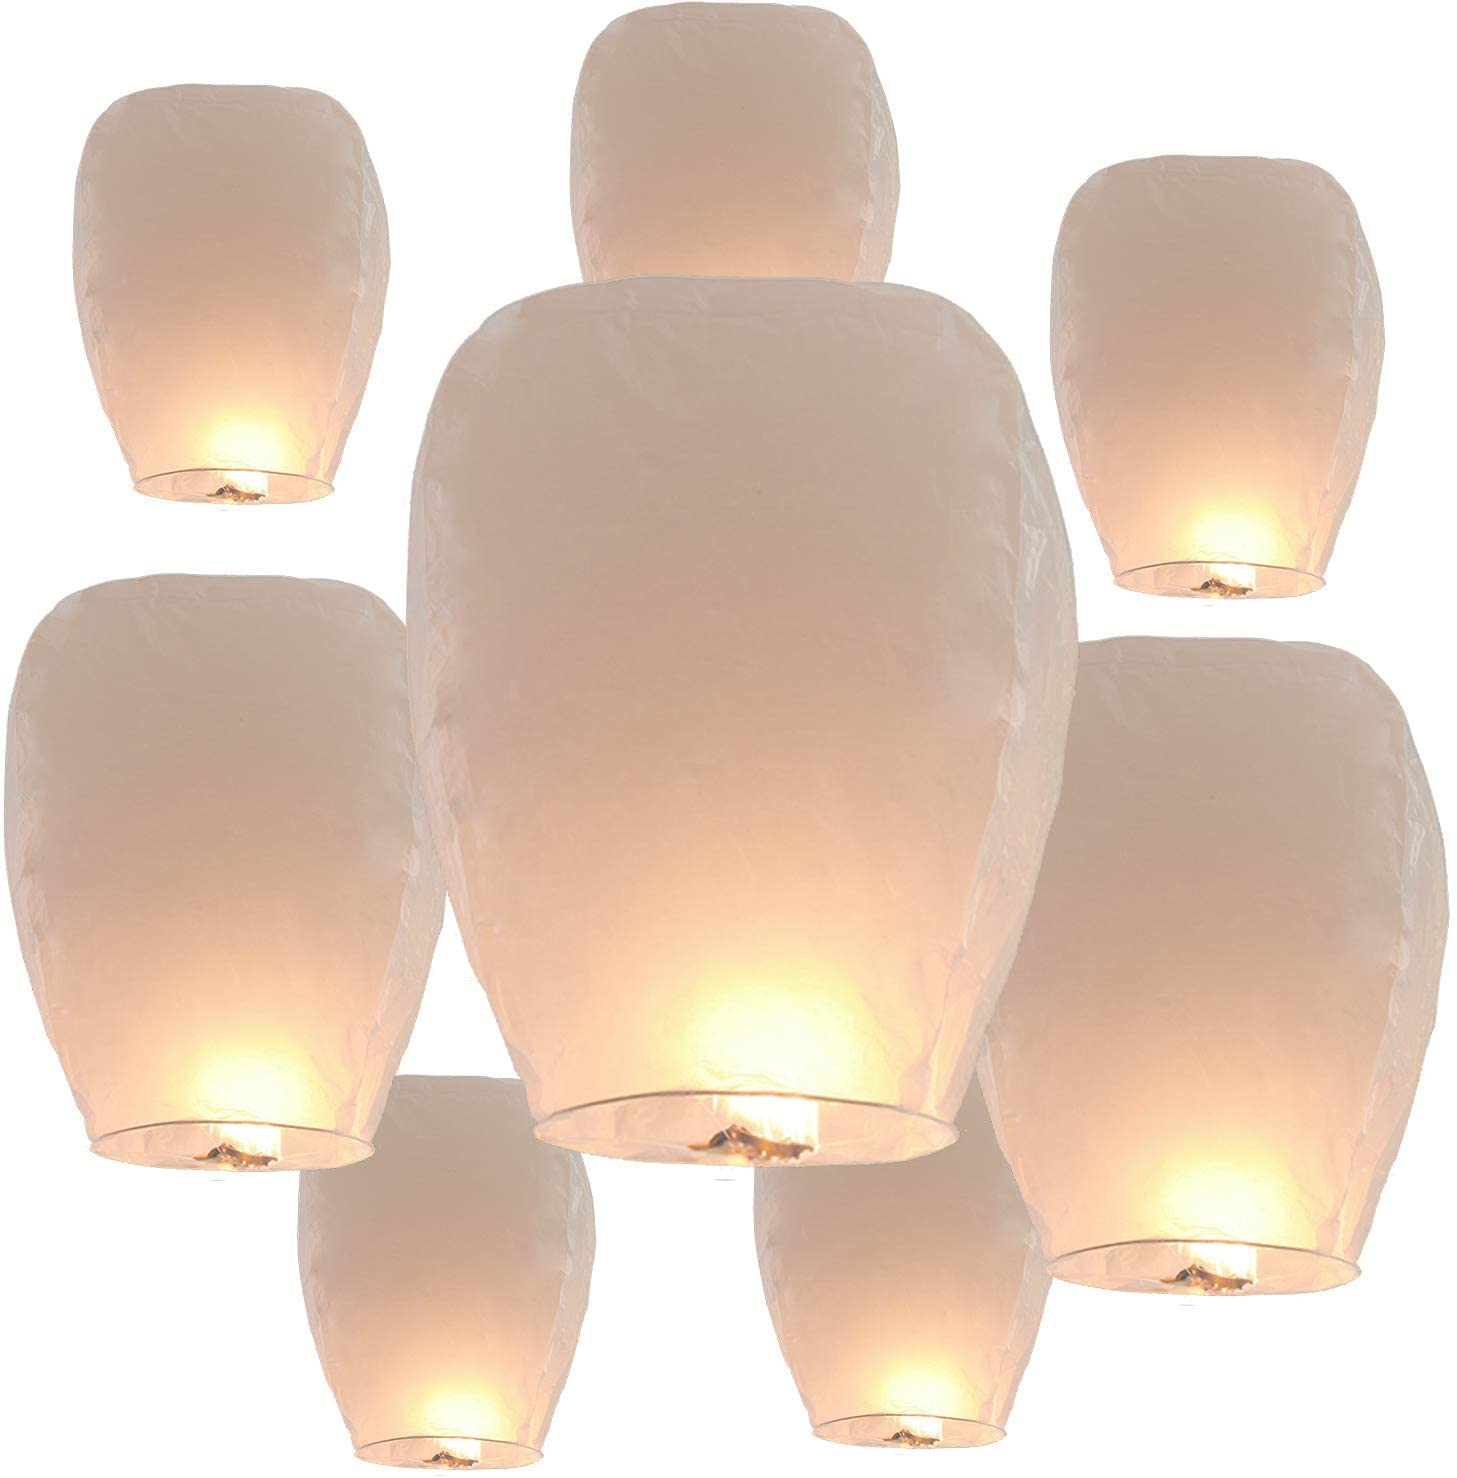 CAMTOA-20PCS-Chinese-Lanterns-Oval-Lantern-for-Wedding-Featival-Party-1895058